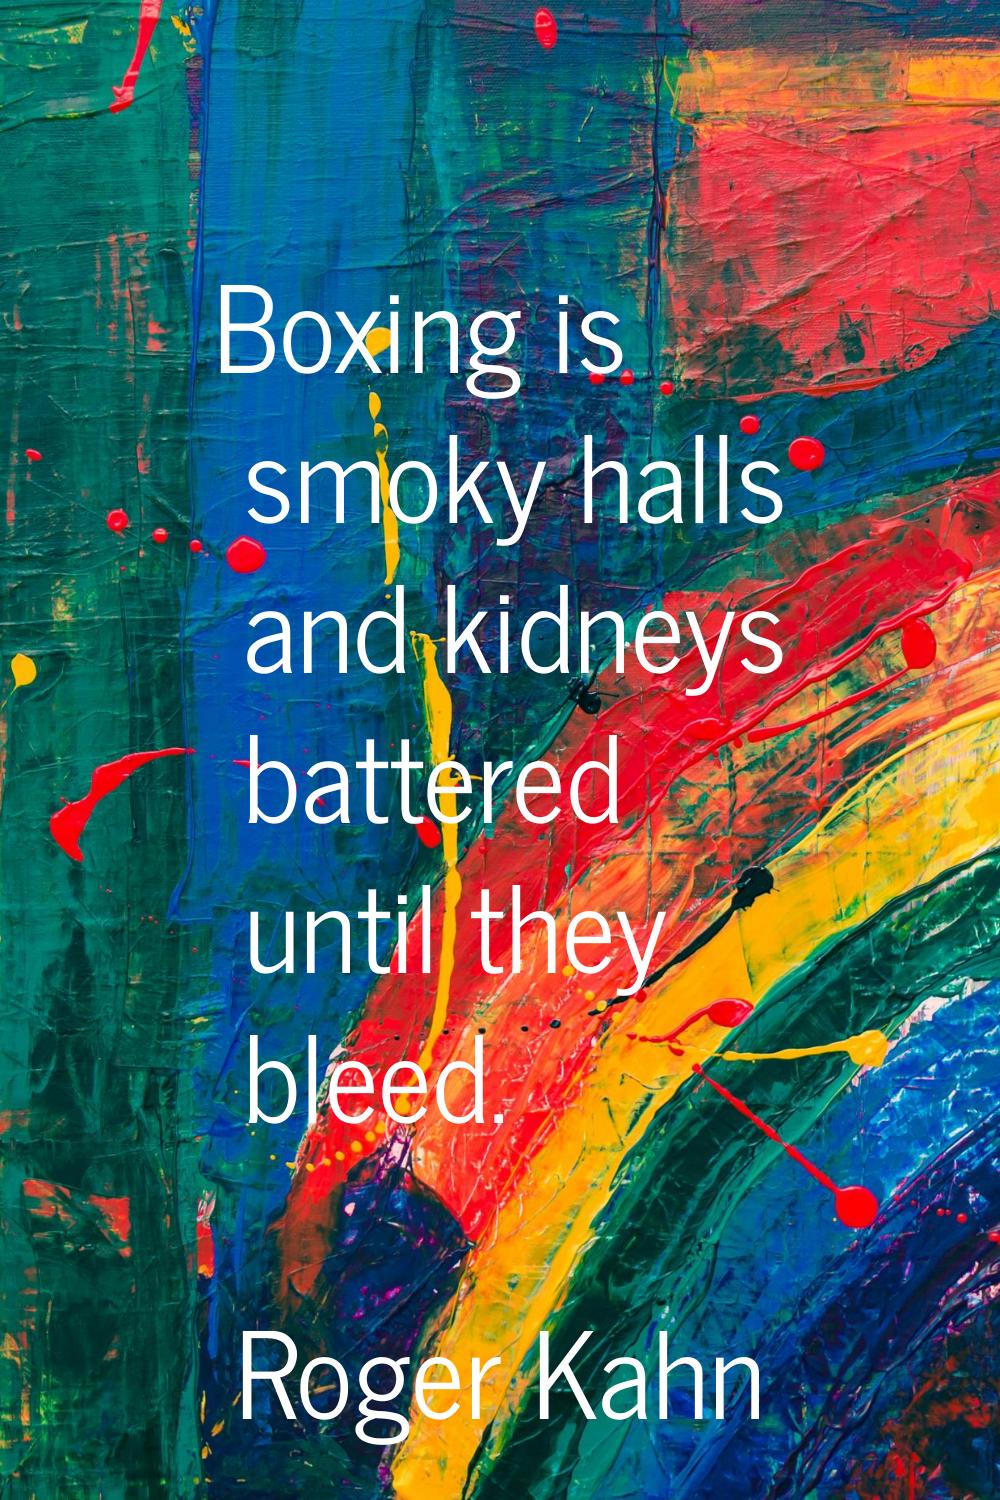 Boxing is smoky halls and kidneys battered until they bleed.